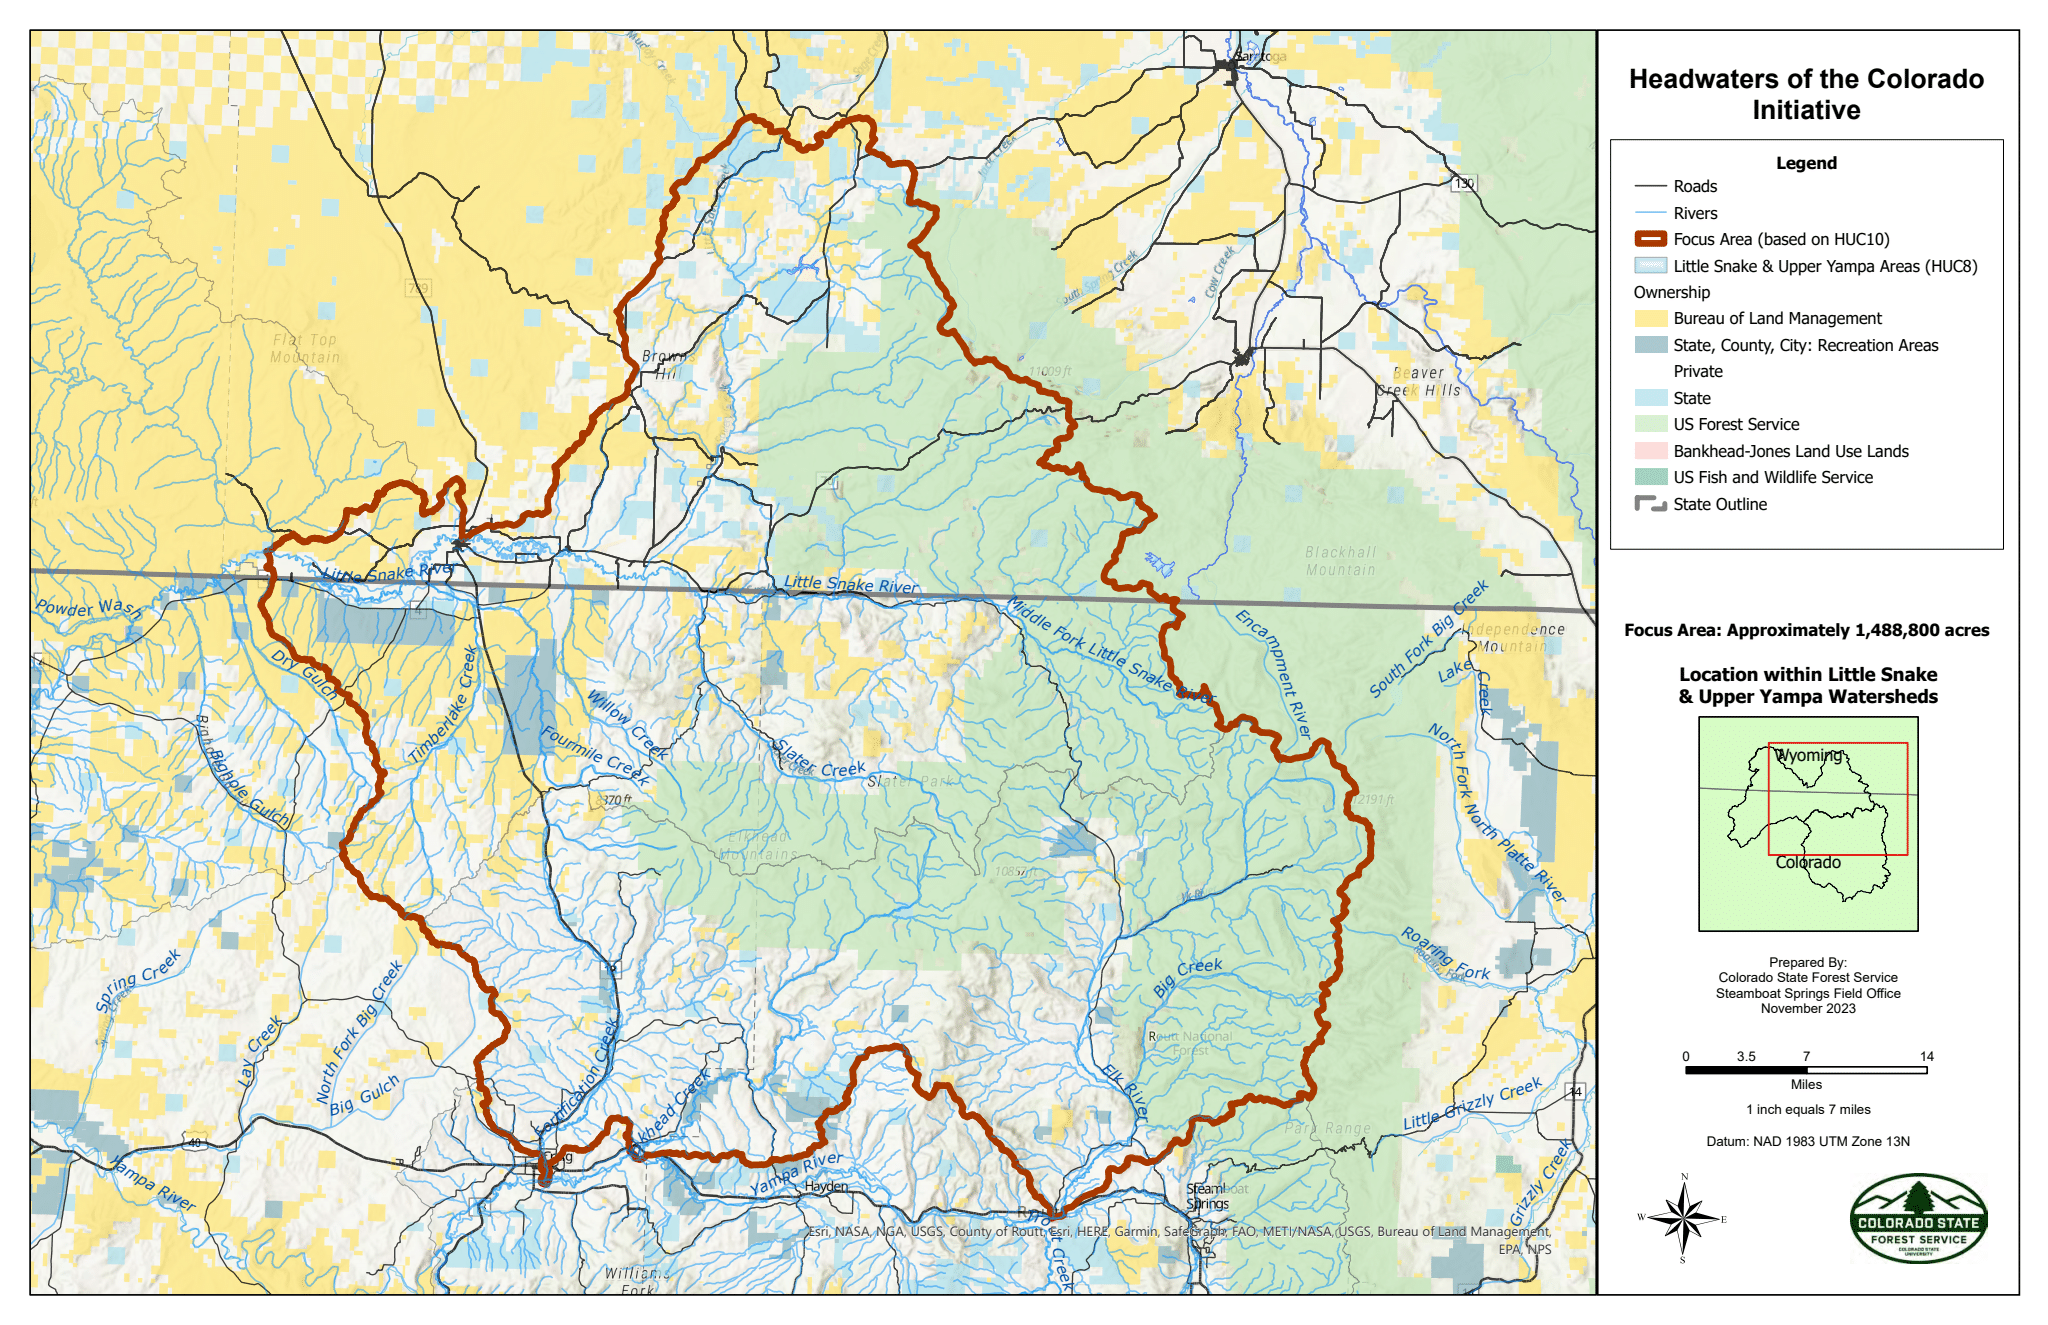 Maps of the HOC watershed and focal area.